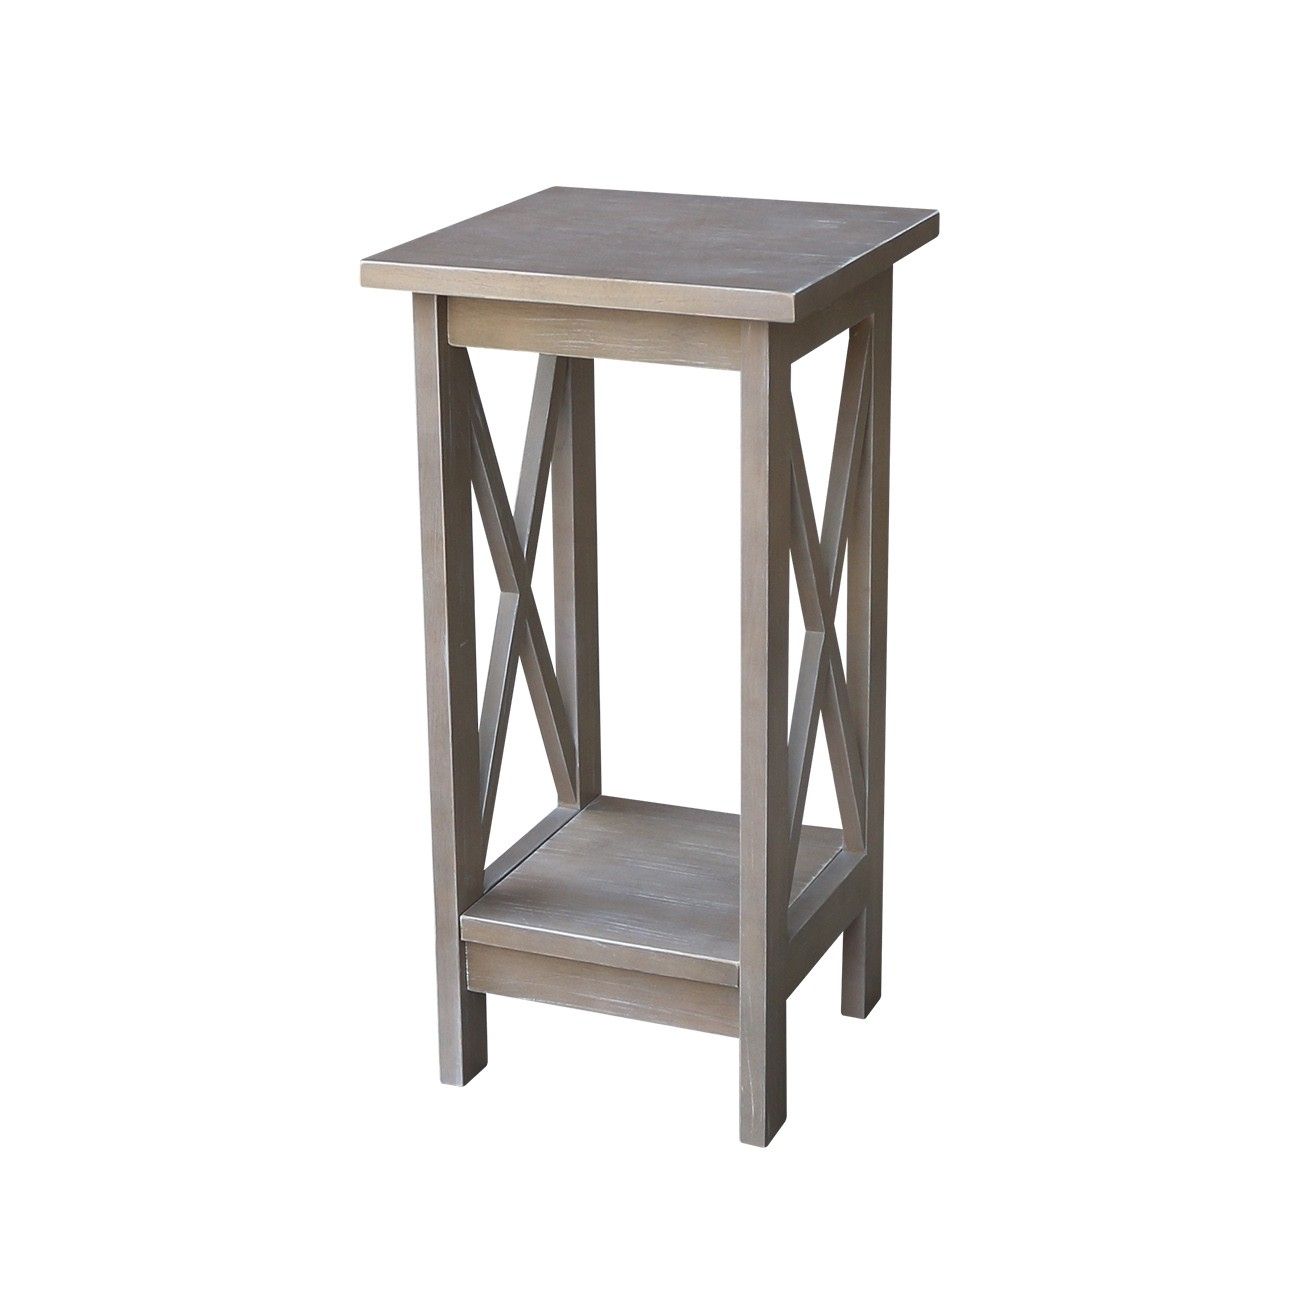 24" X Sided Plant Stand  Weathered Gray (3 Sizes Available) Throughout Weathered Gray Plant Stands (View 2 of 15)